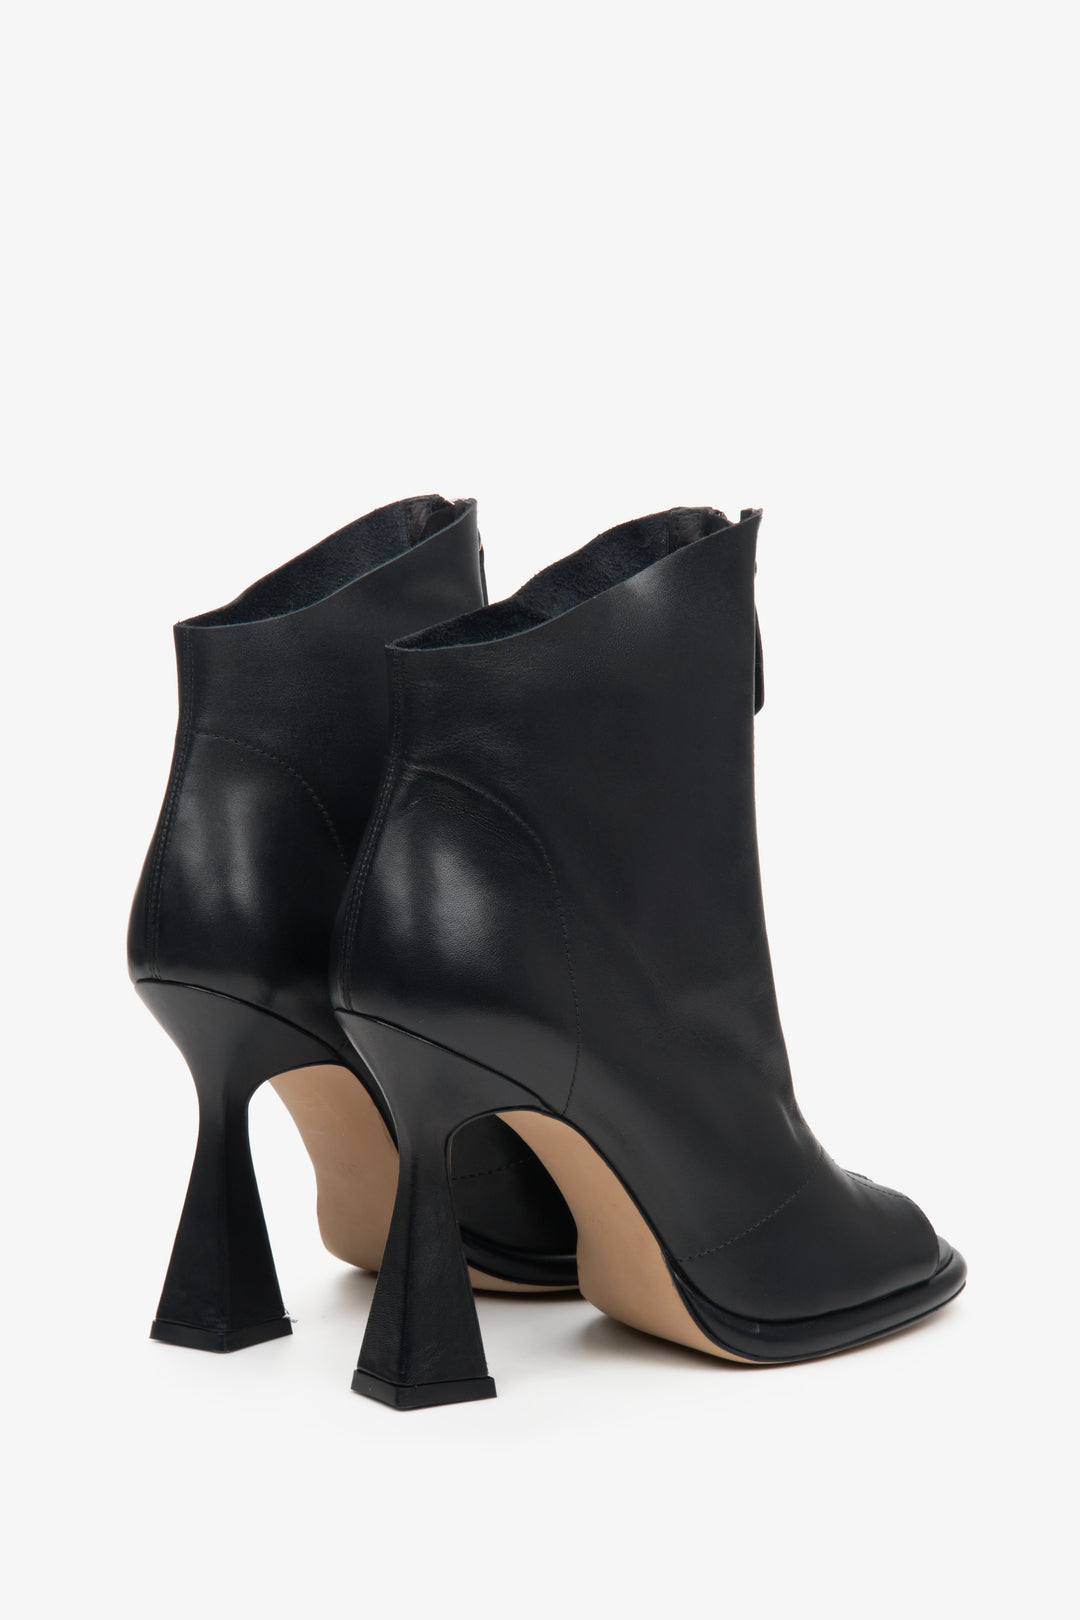 Women's leather open toe ankle boots for summer Estro in black - close-up of the back of the model.